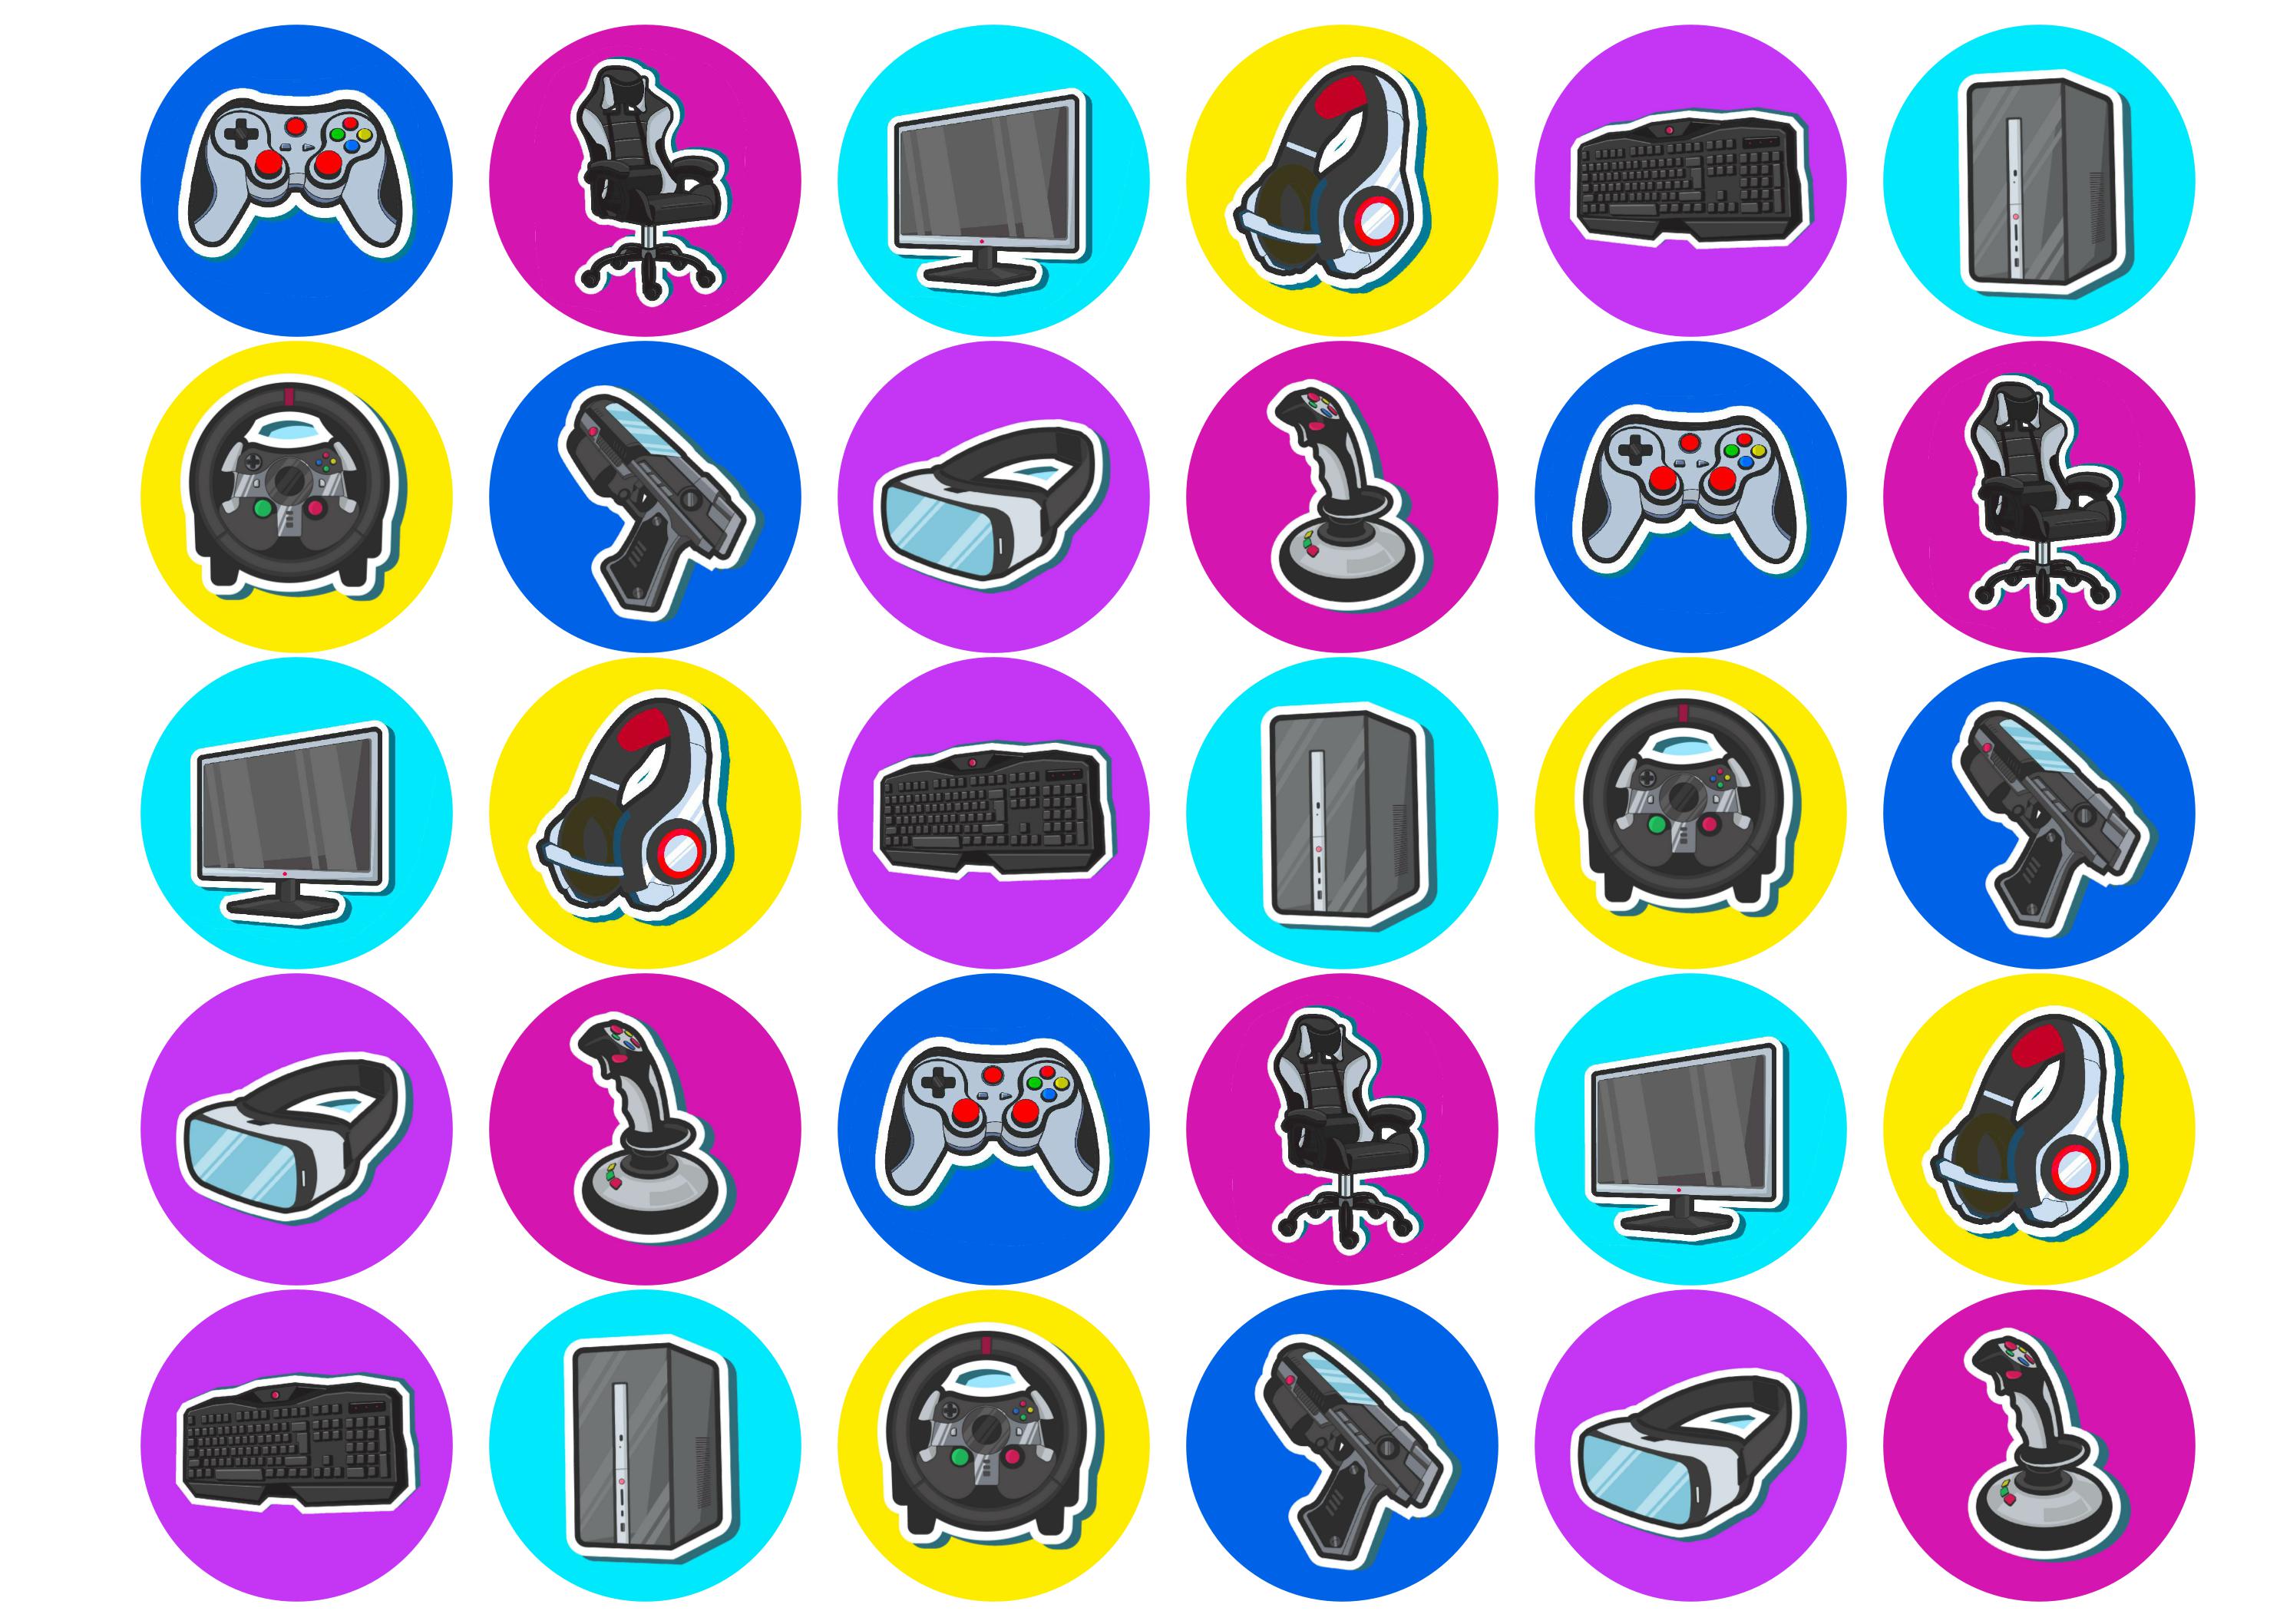 30 Gaming cupcake toppers inspired by Xbox and Playstation